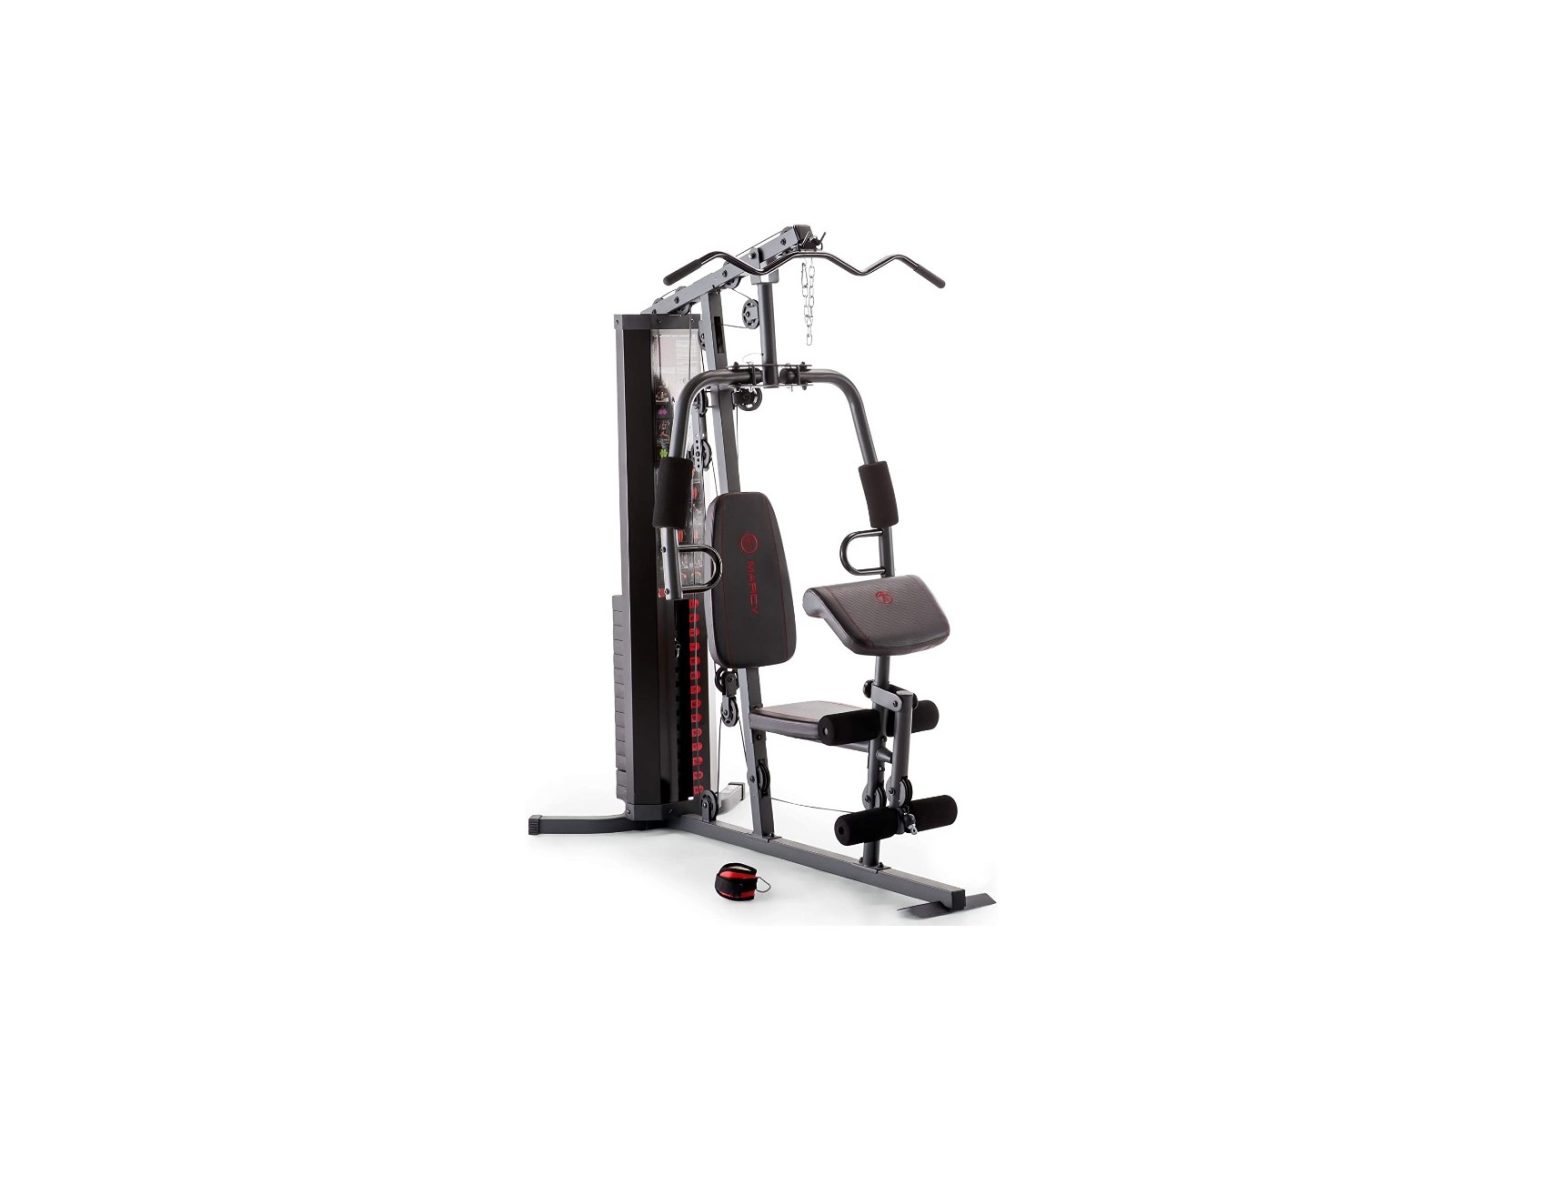 MARCY MWM-989 Multifunctional Home Gym Station Owner’s Manual